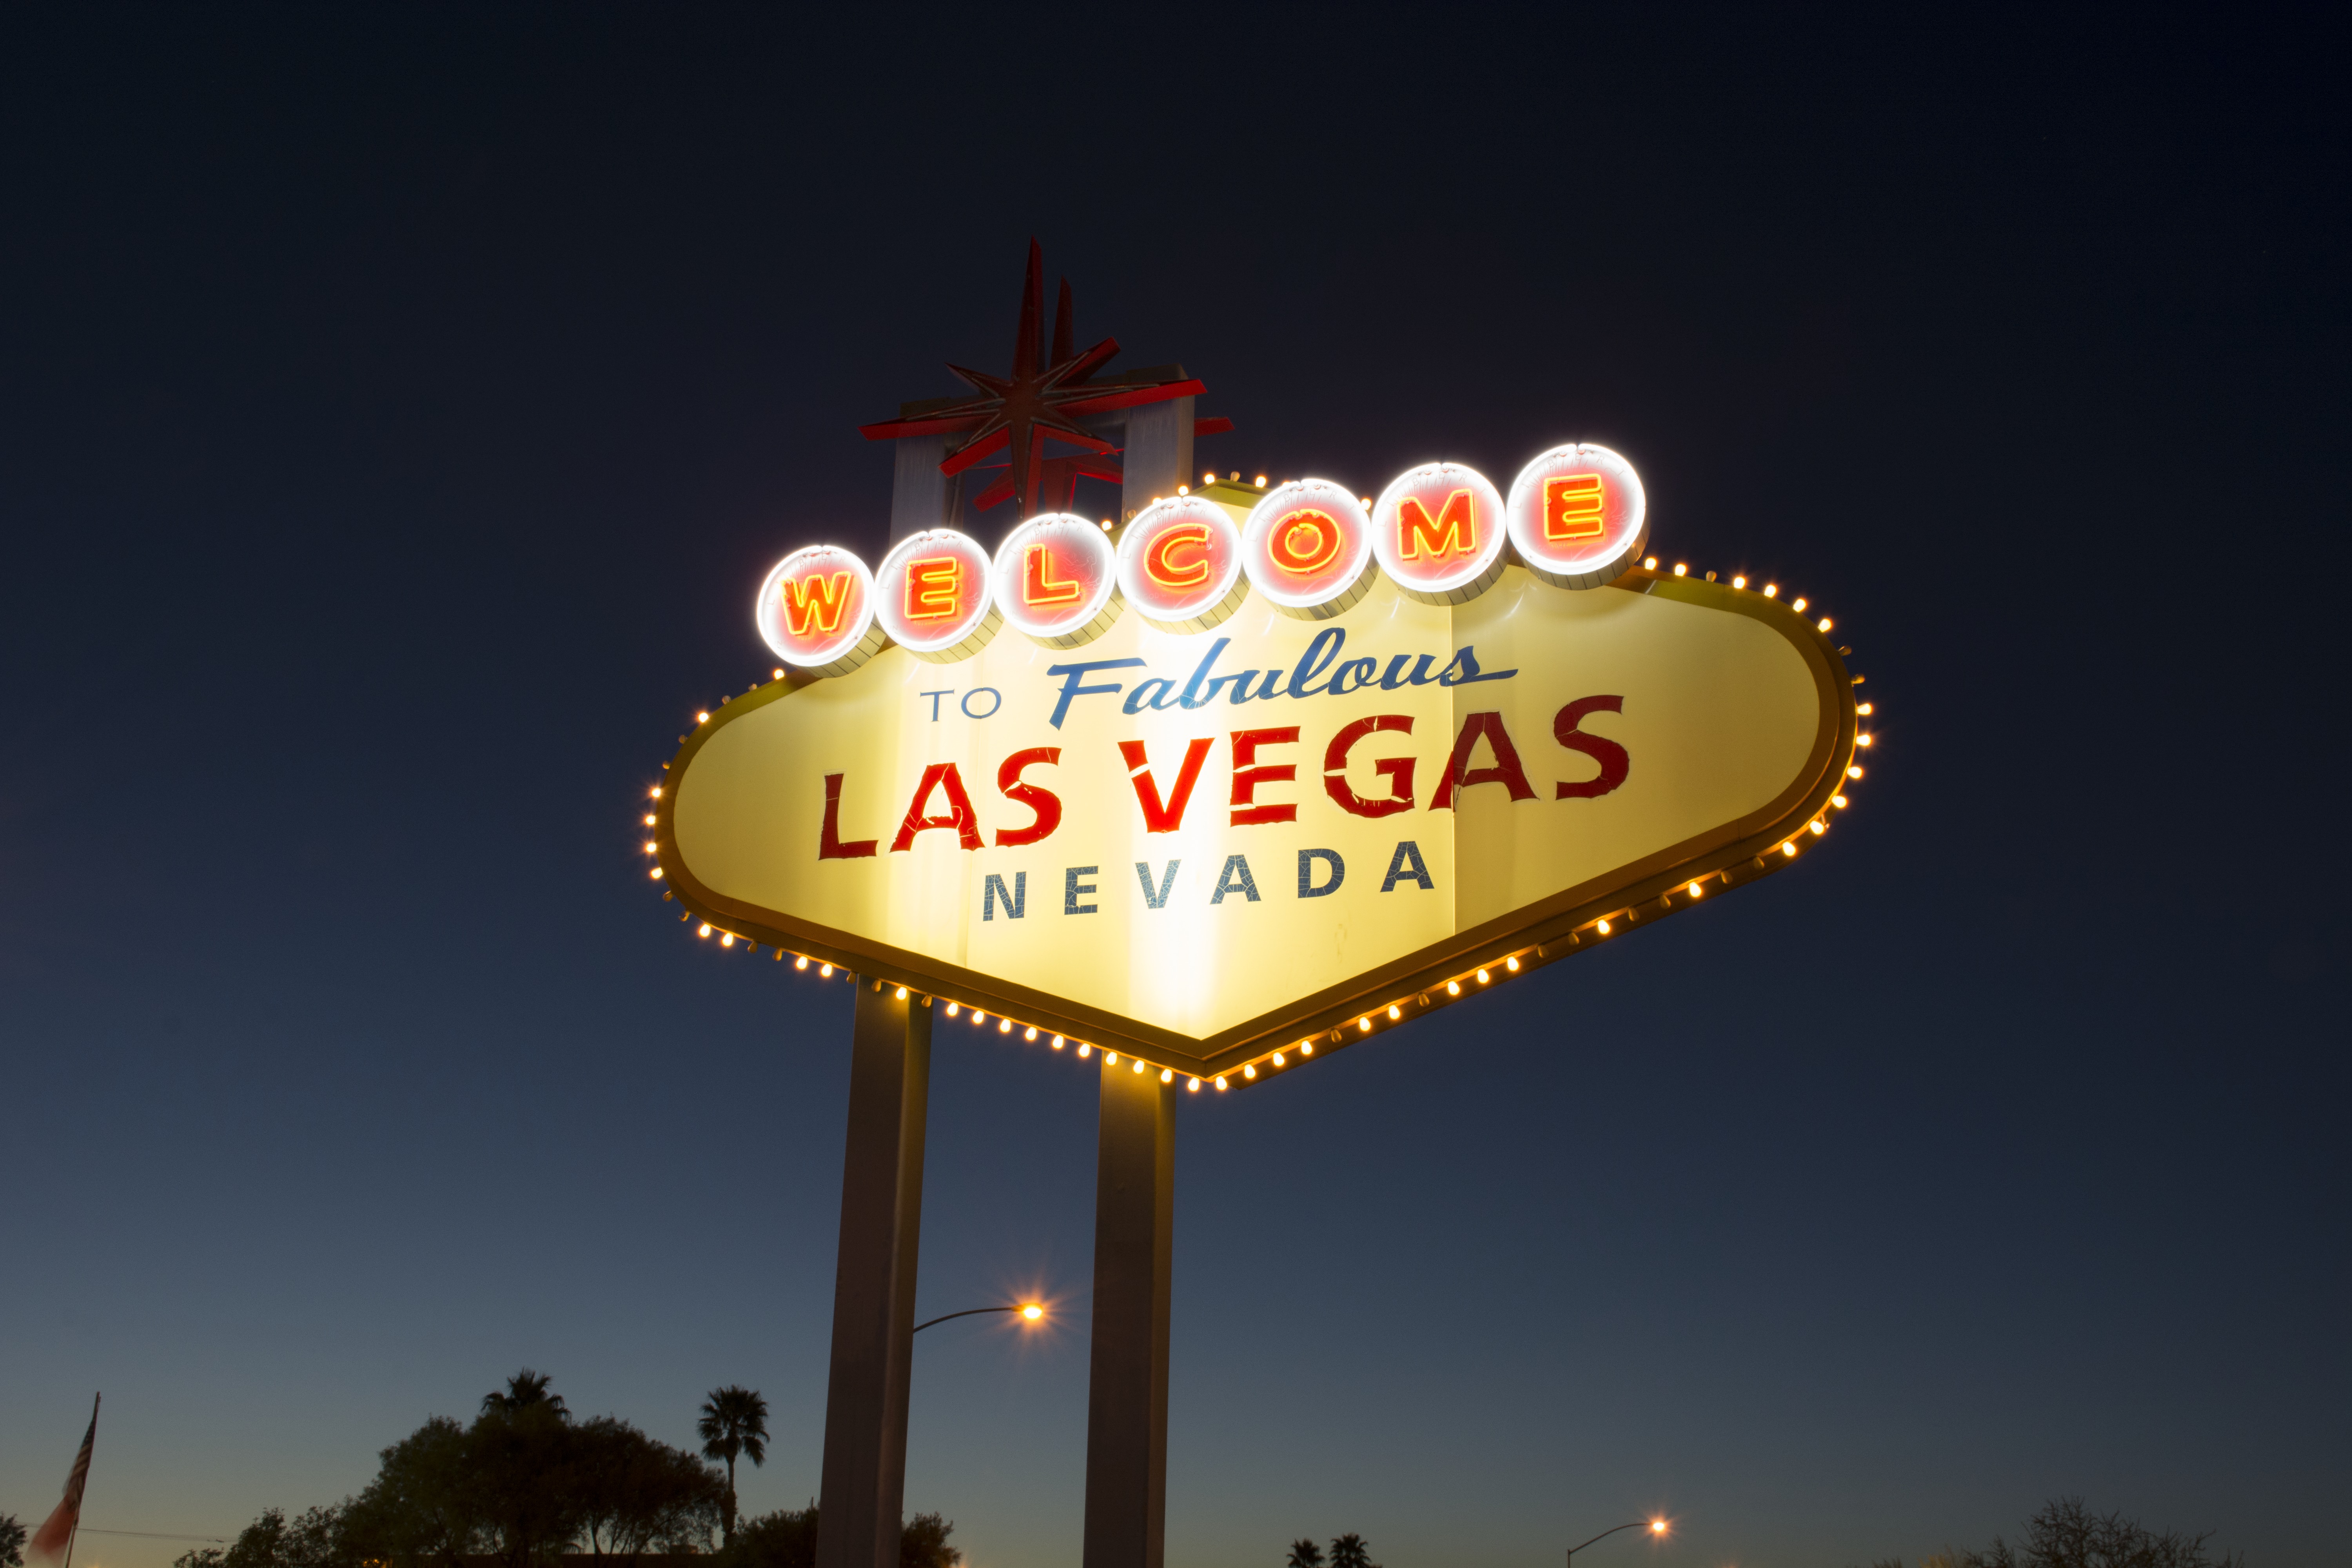 Photographs of "Welcome to Fabulous Las Vegas" sign replica, Las Vegas (Nev.),  March 14, 2017